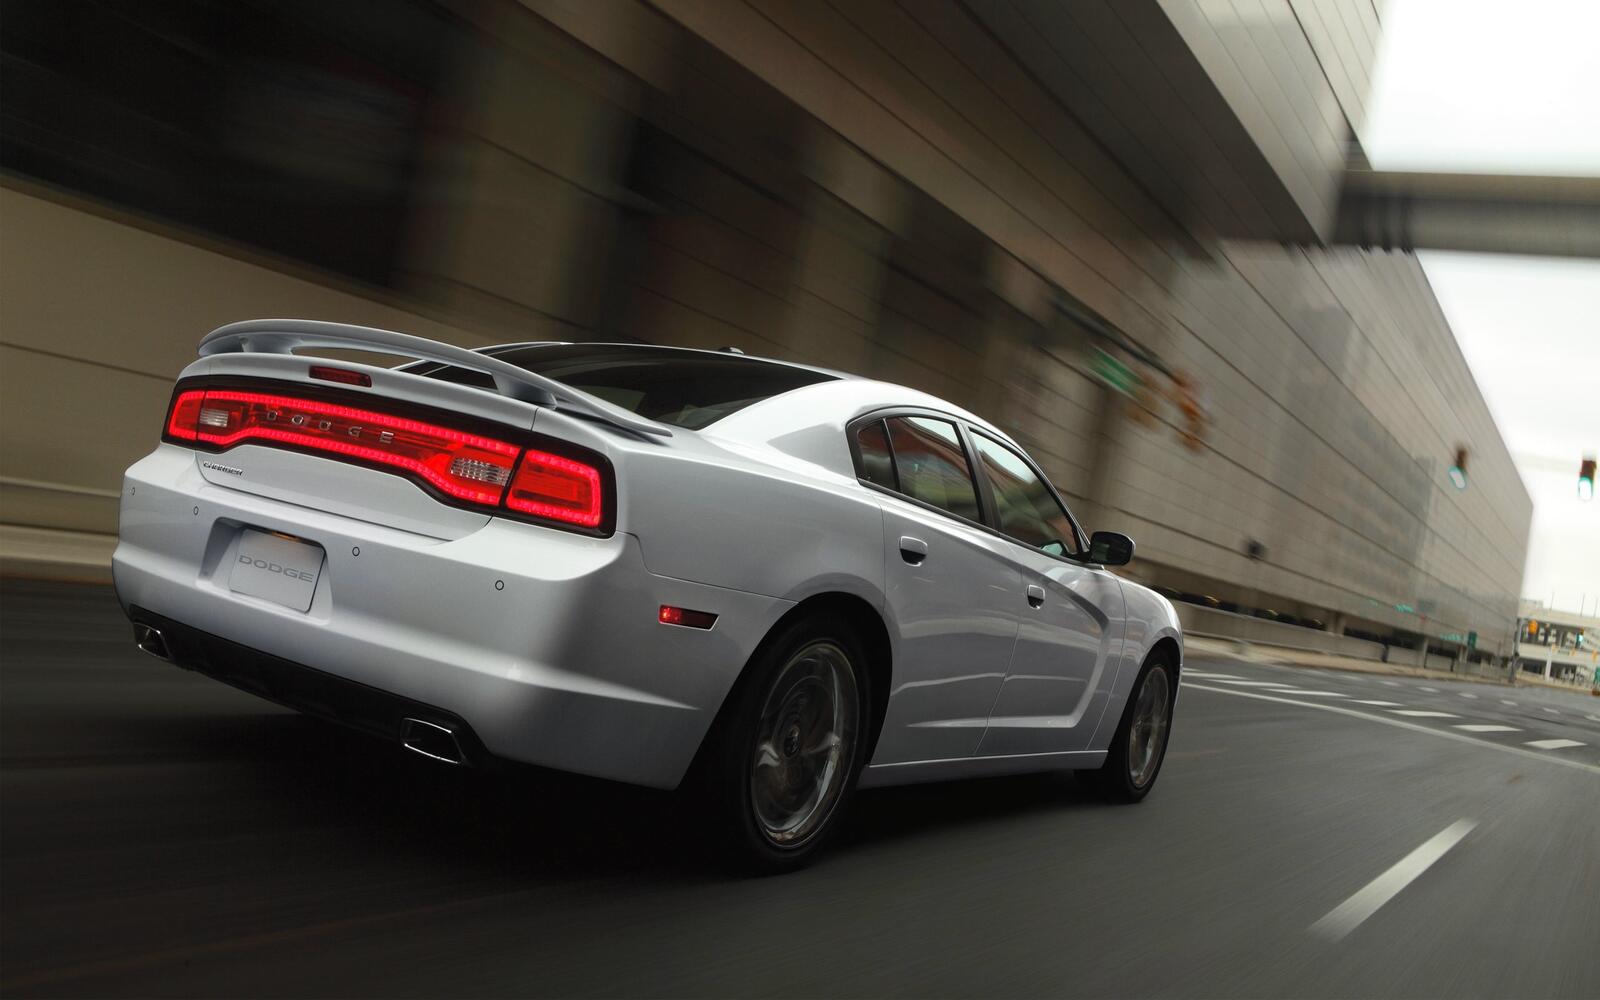 Wallpapers car Dodge Charger on the desktop